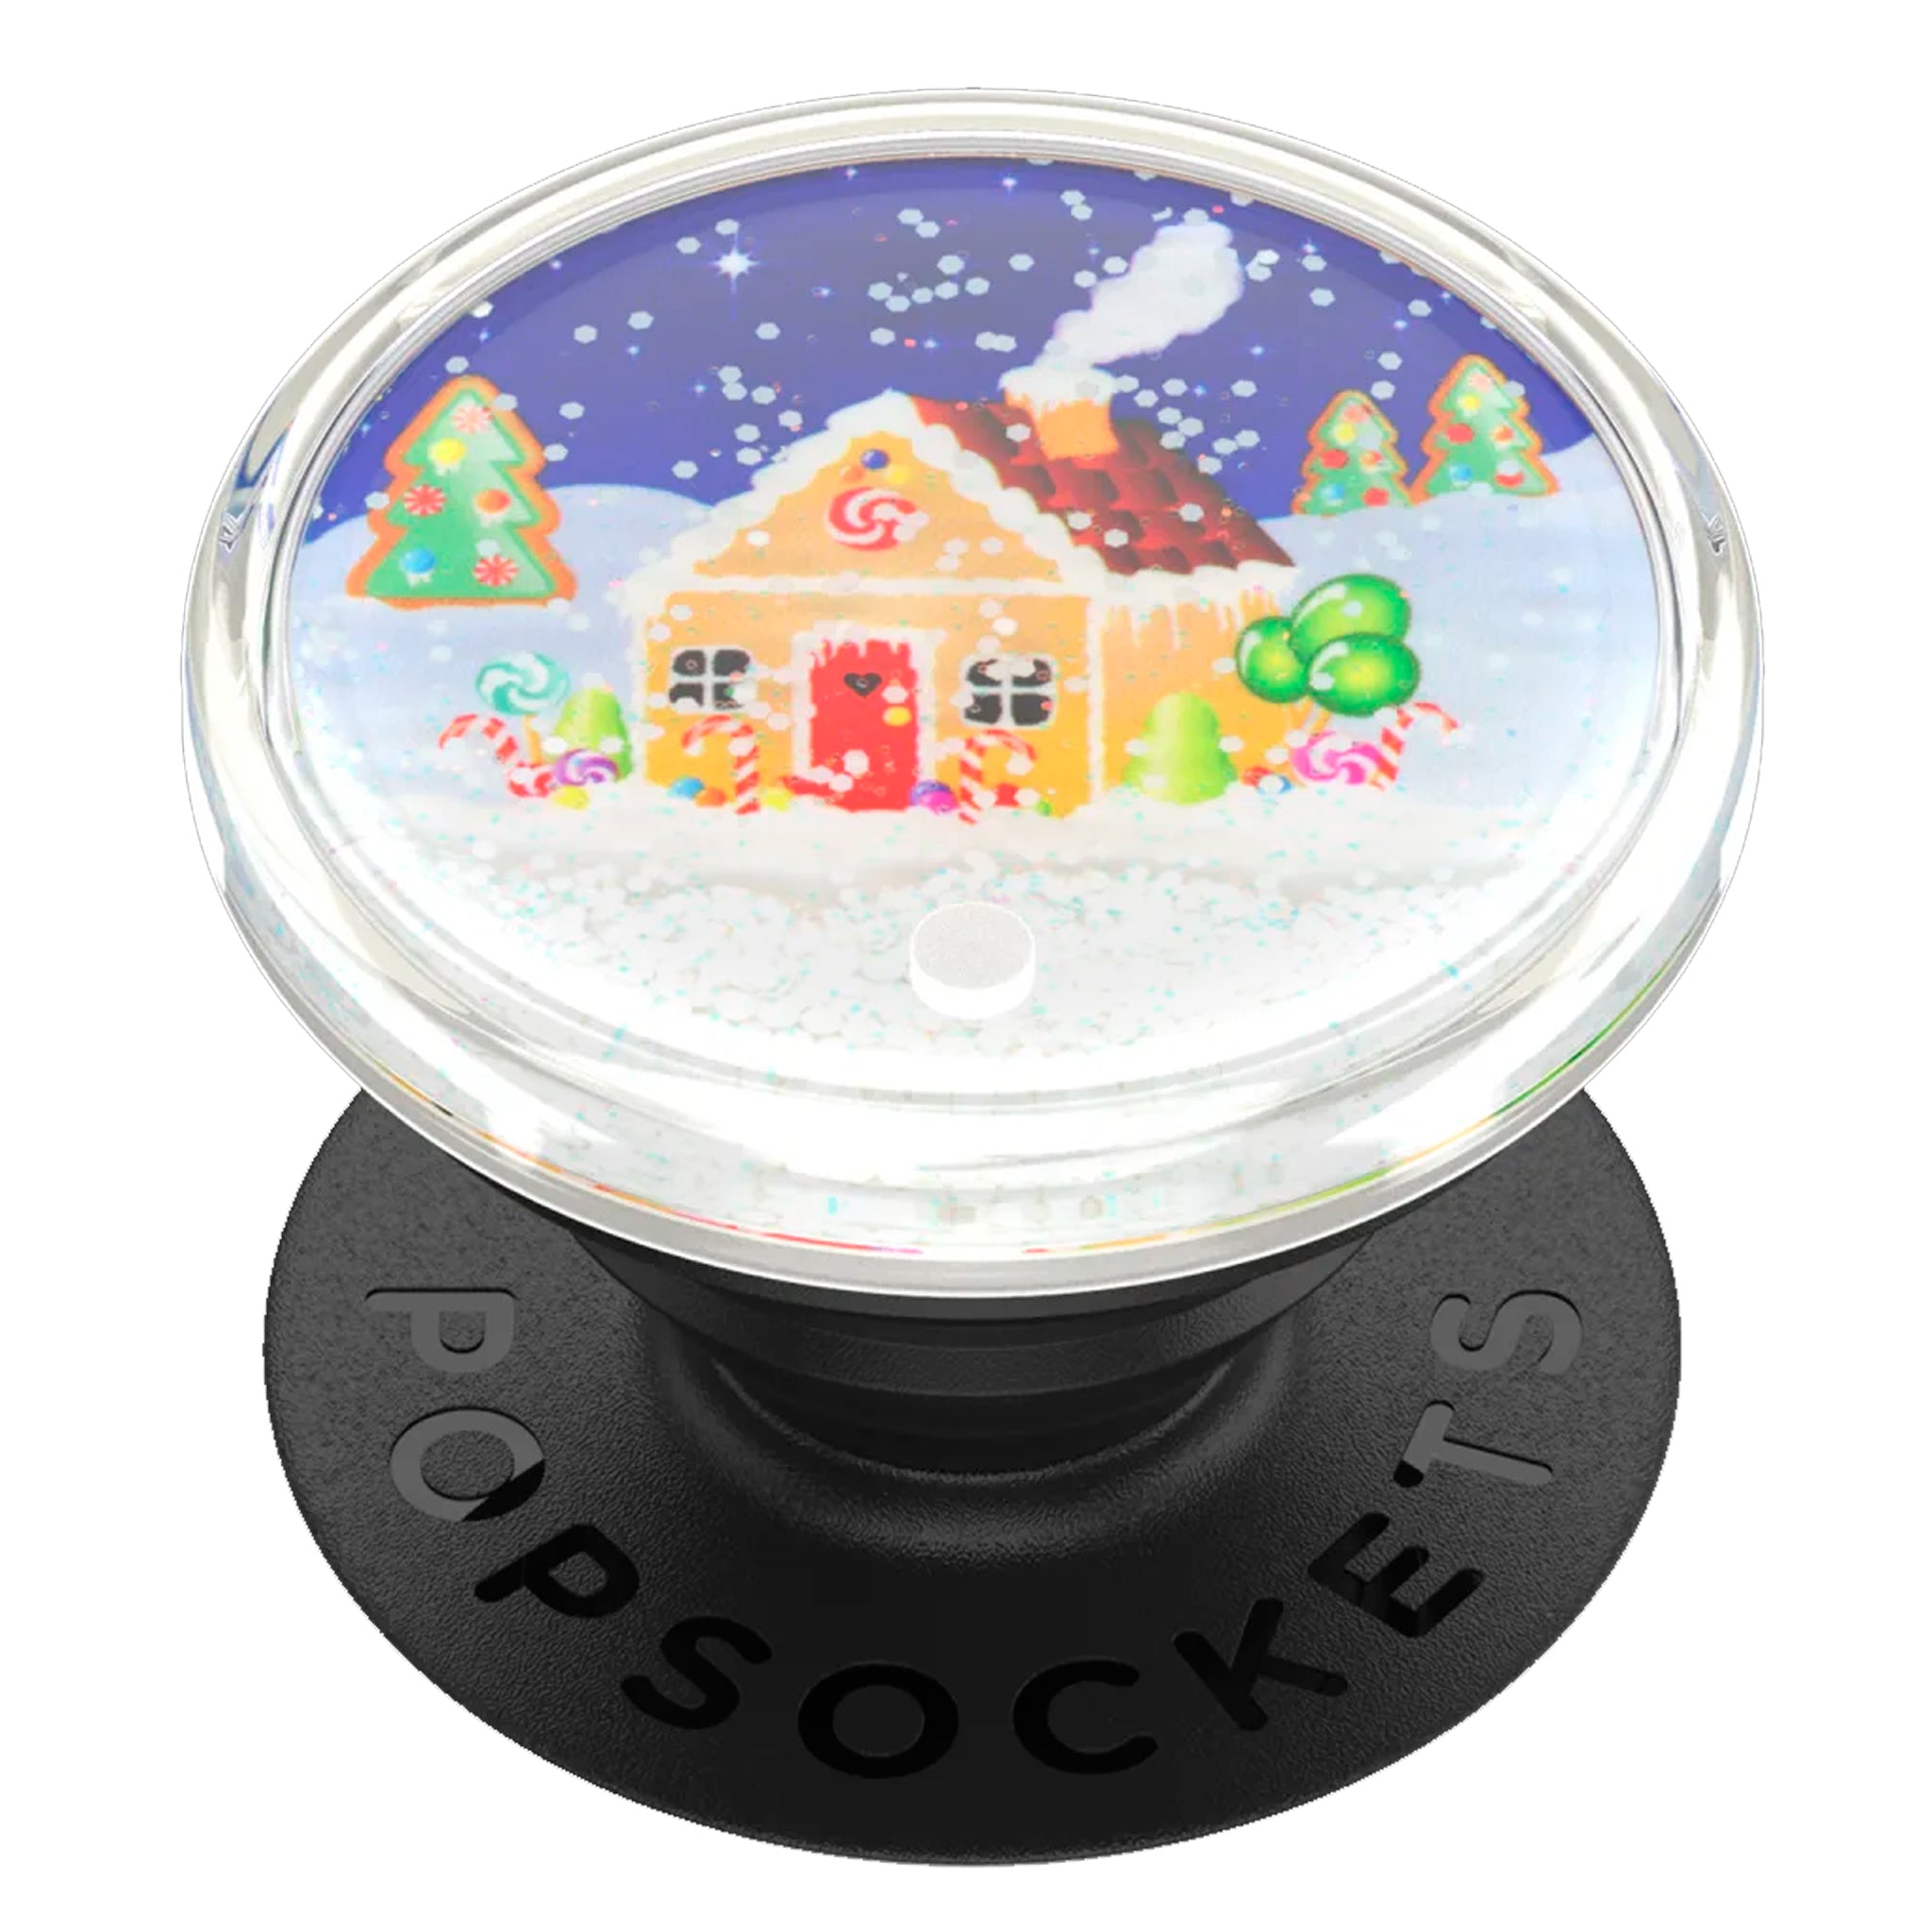 Popsockets - Popgrip Luxe - Tidepool Candy Cane Lane